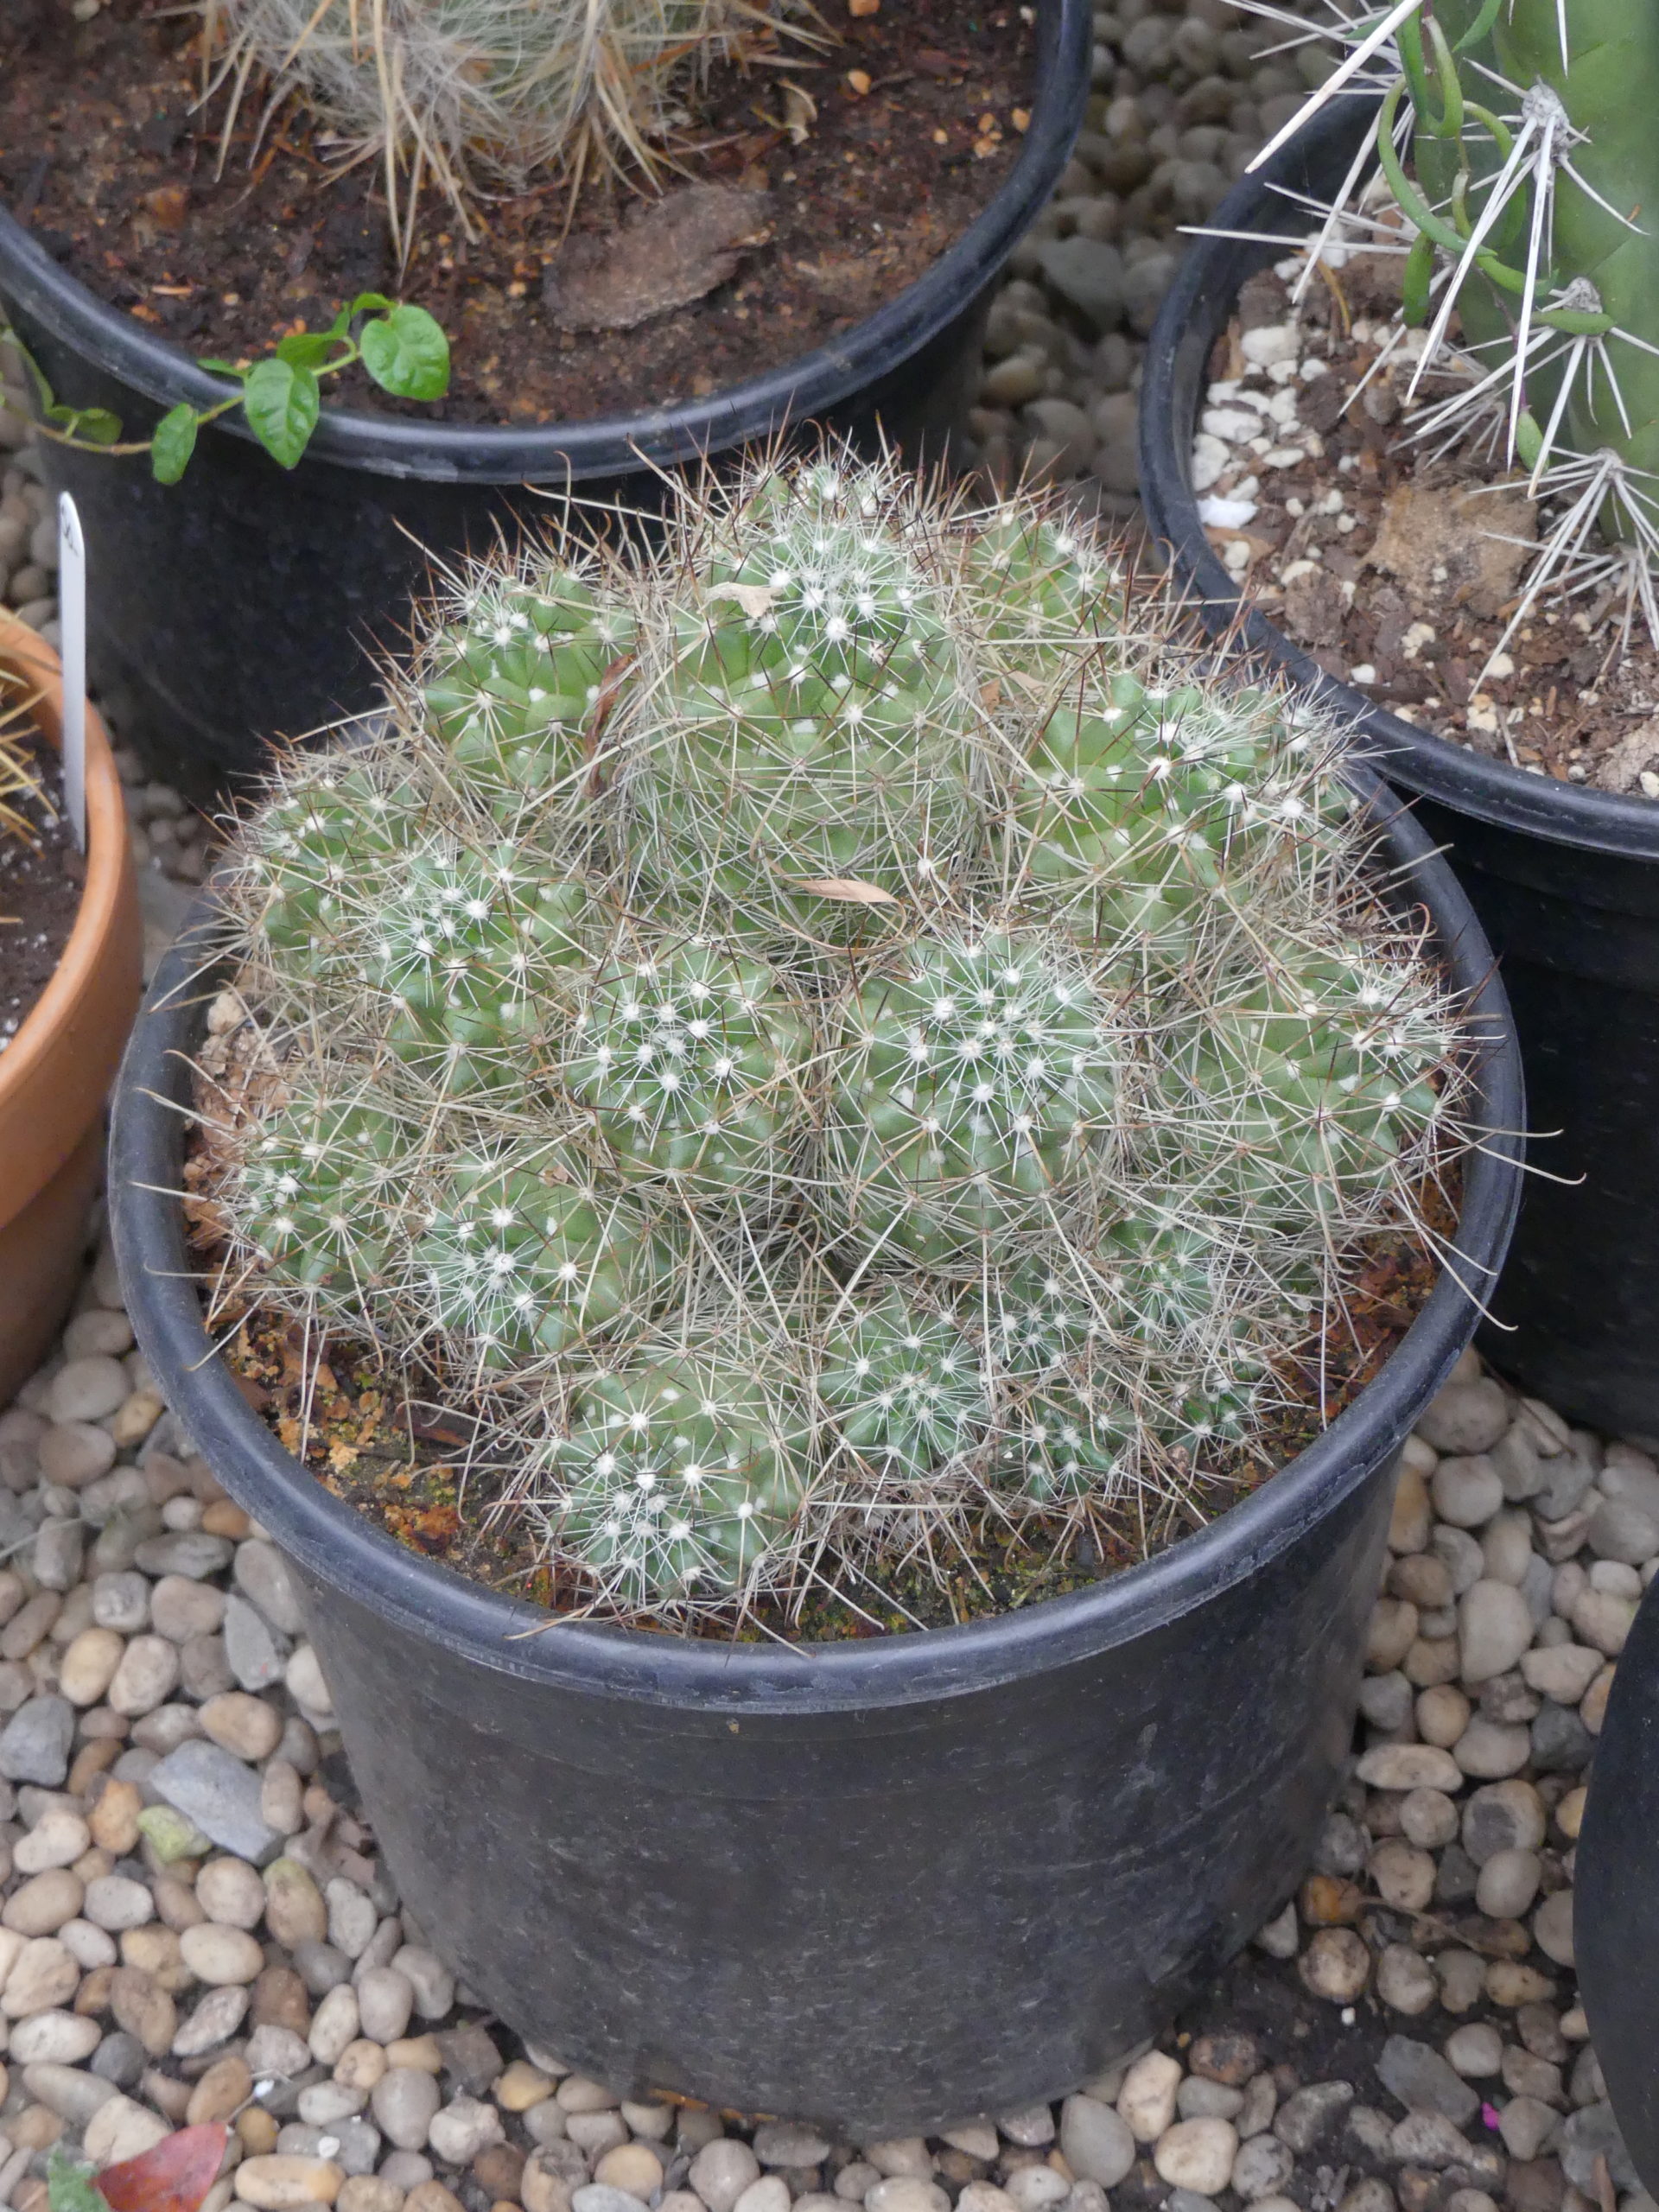 It can be frustrating buying cacti that don’t have name and care tags, but this one appears to be Parodia aureipina, or a miniature barrel cactus. This is one of the easiest to grow.